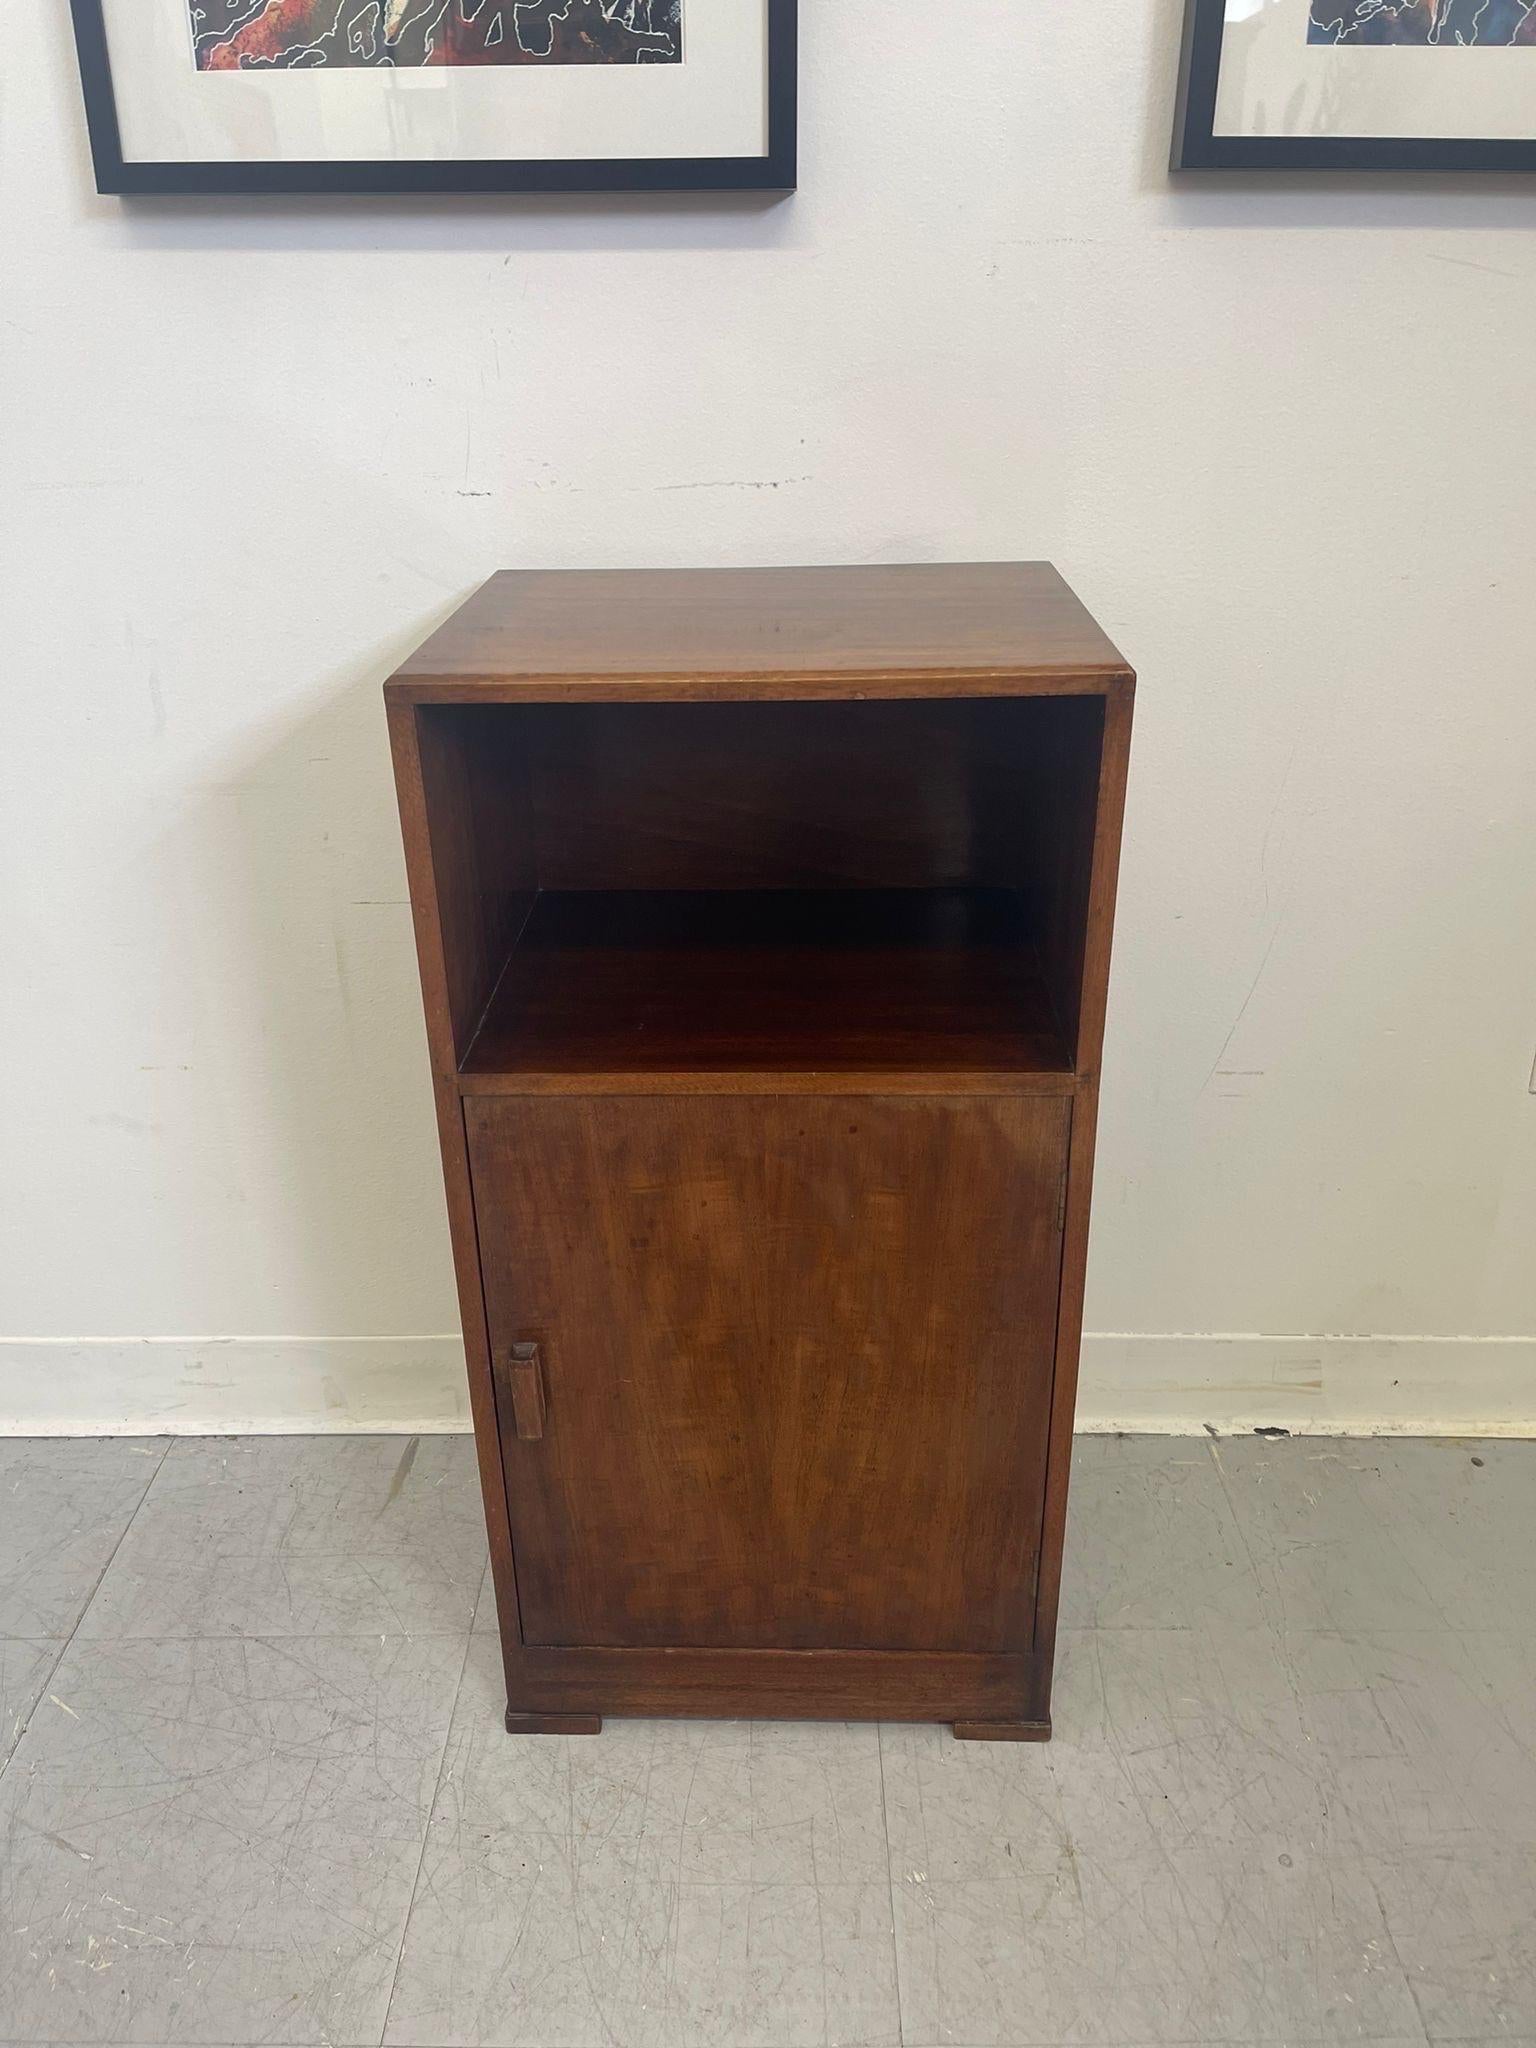 This End Table has gorgeous wood grain with a single cabinet door with open shelf above. Cabinet space has shelving. wood Carved handle. Vintage Condition Consistent with Age as Pictured.

Dimensions. 15 W ; 12 D ; 30 H



